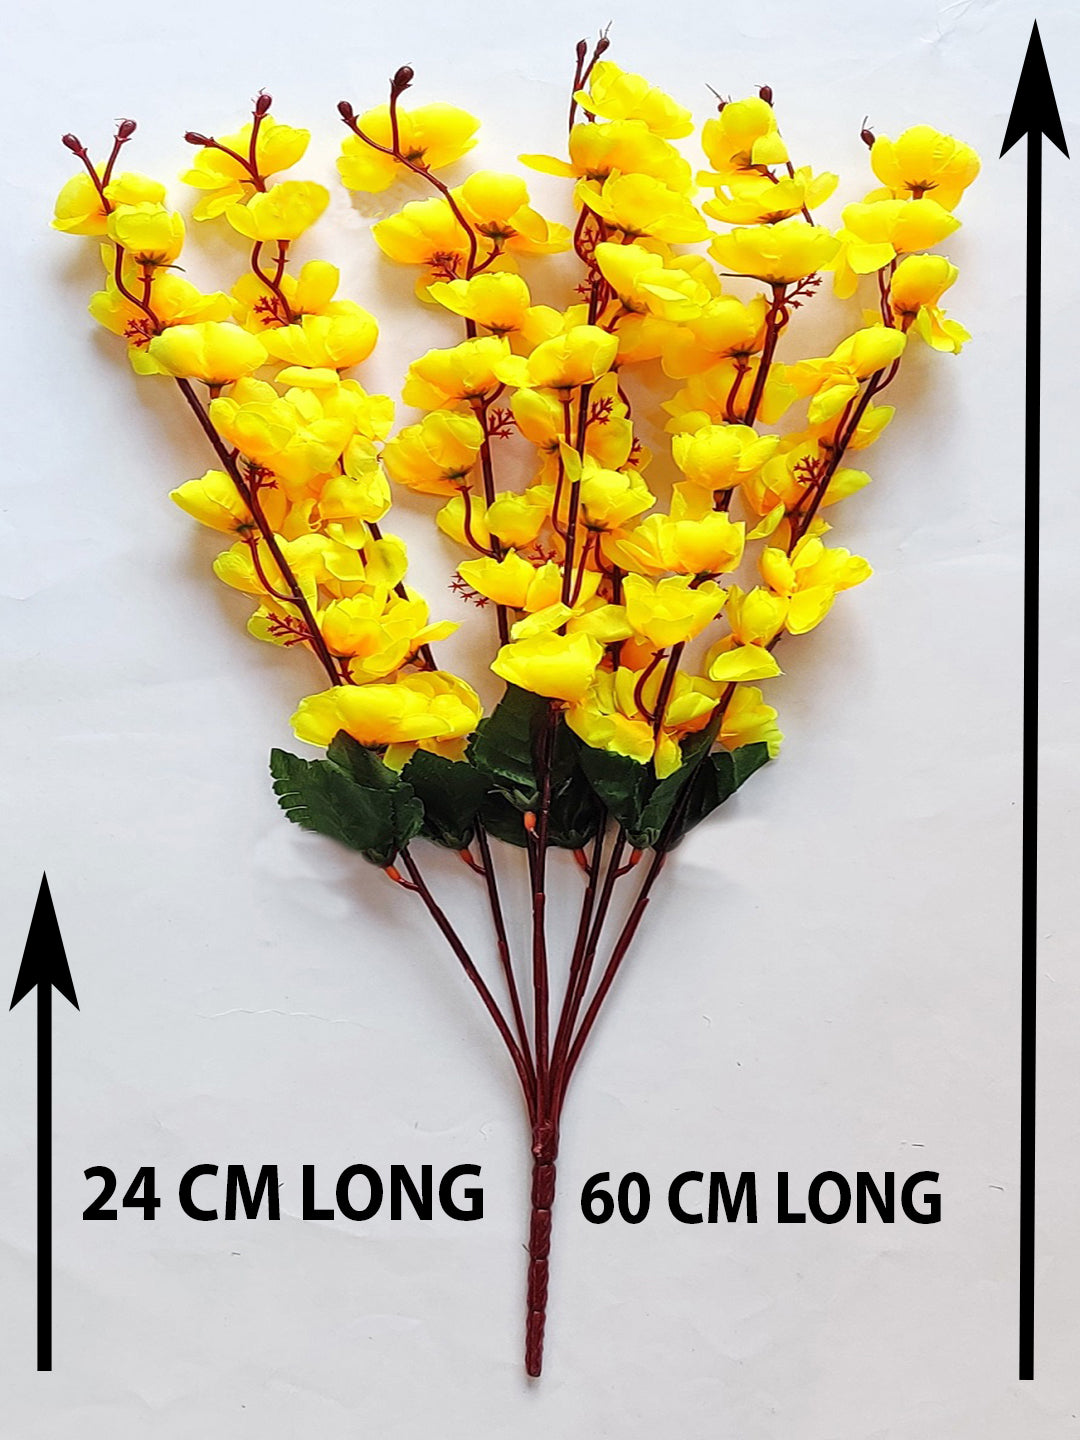 ARTSY® Sunny Yellow Artificial Cherry Blossom Flower Bunch - Radiant Floral Beauty For Home decoration, Office Decor, Vase Filler, Without Vase, 55 CM Long